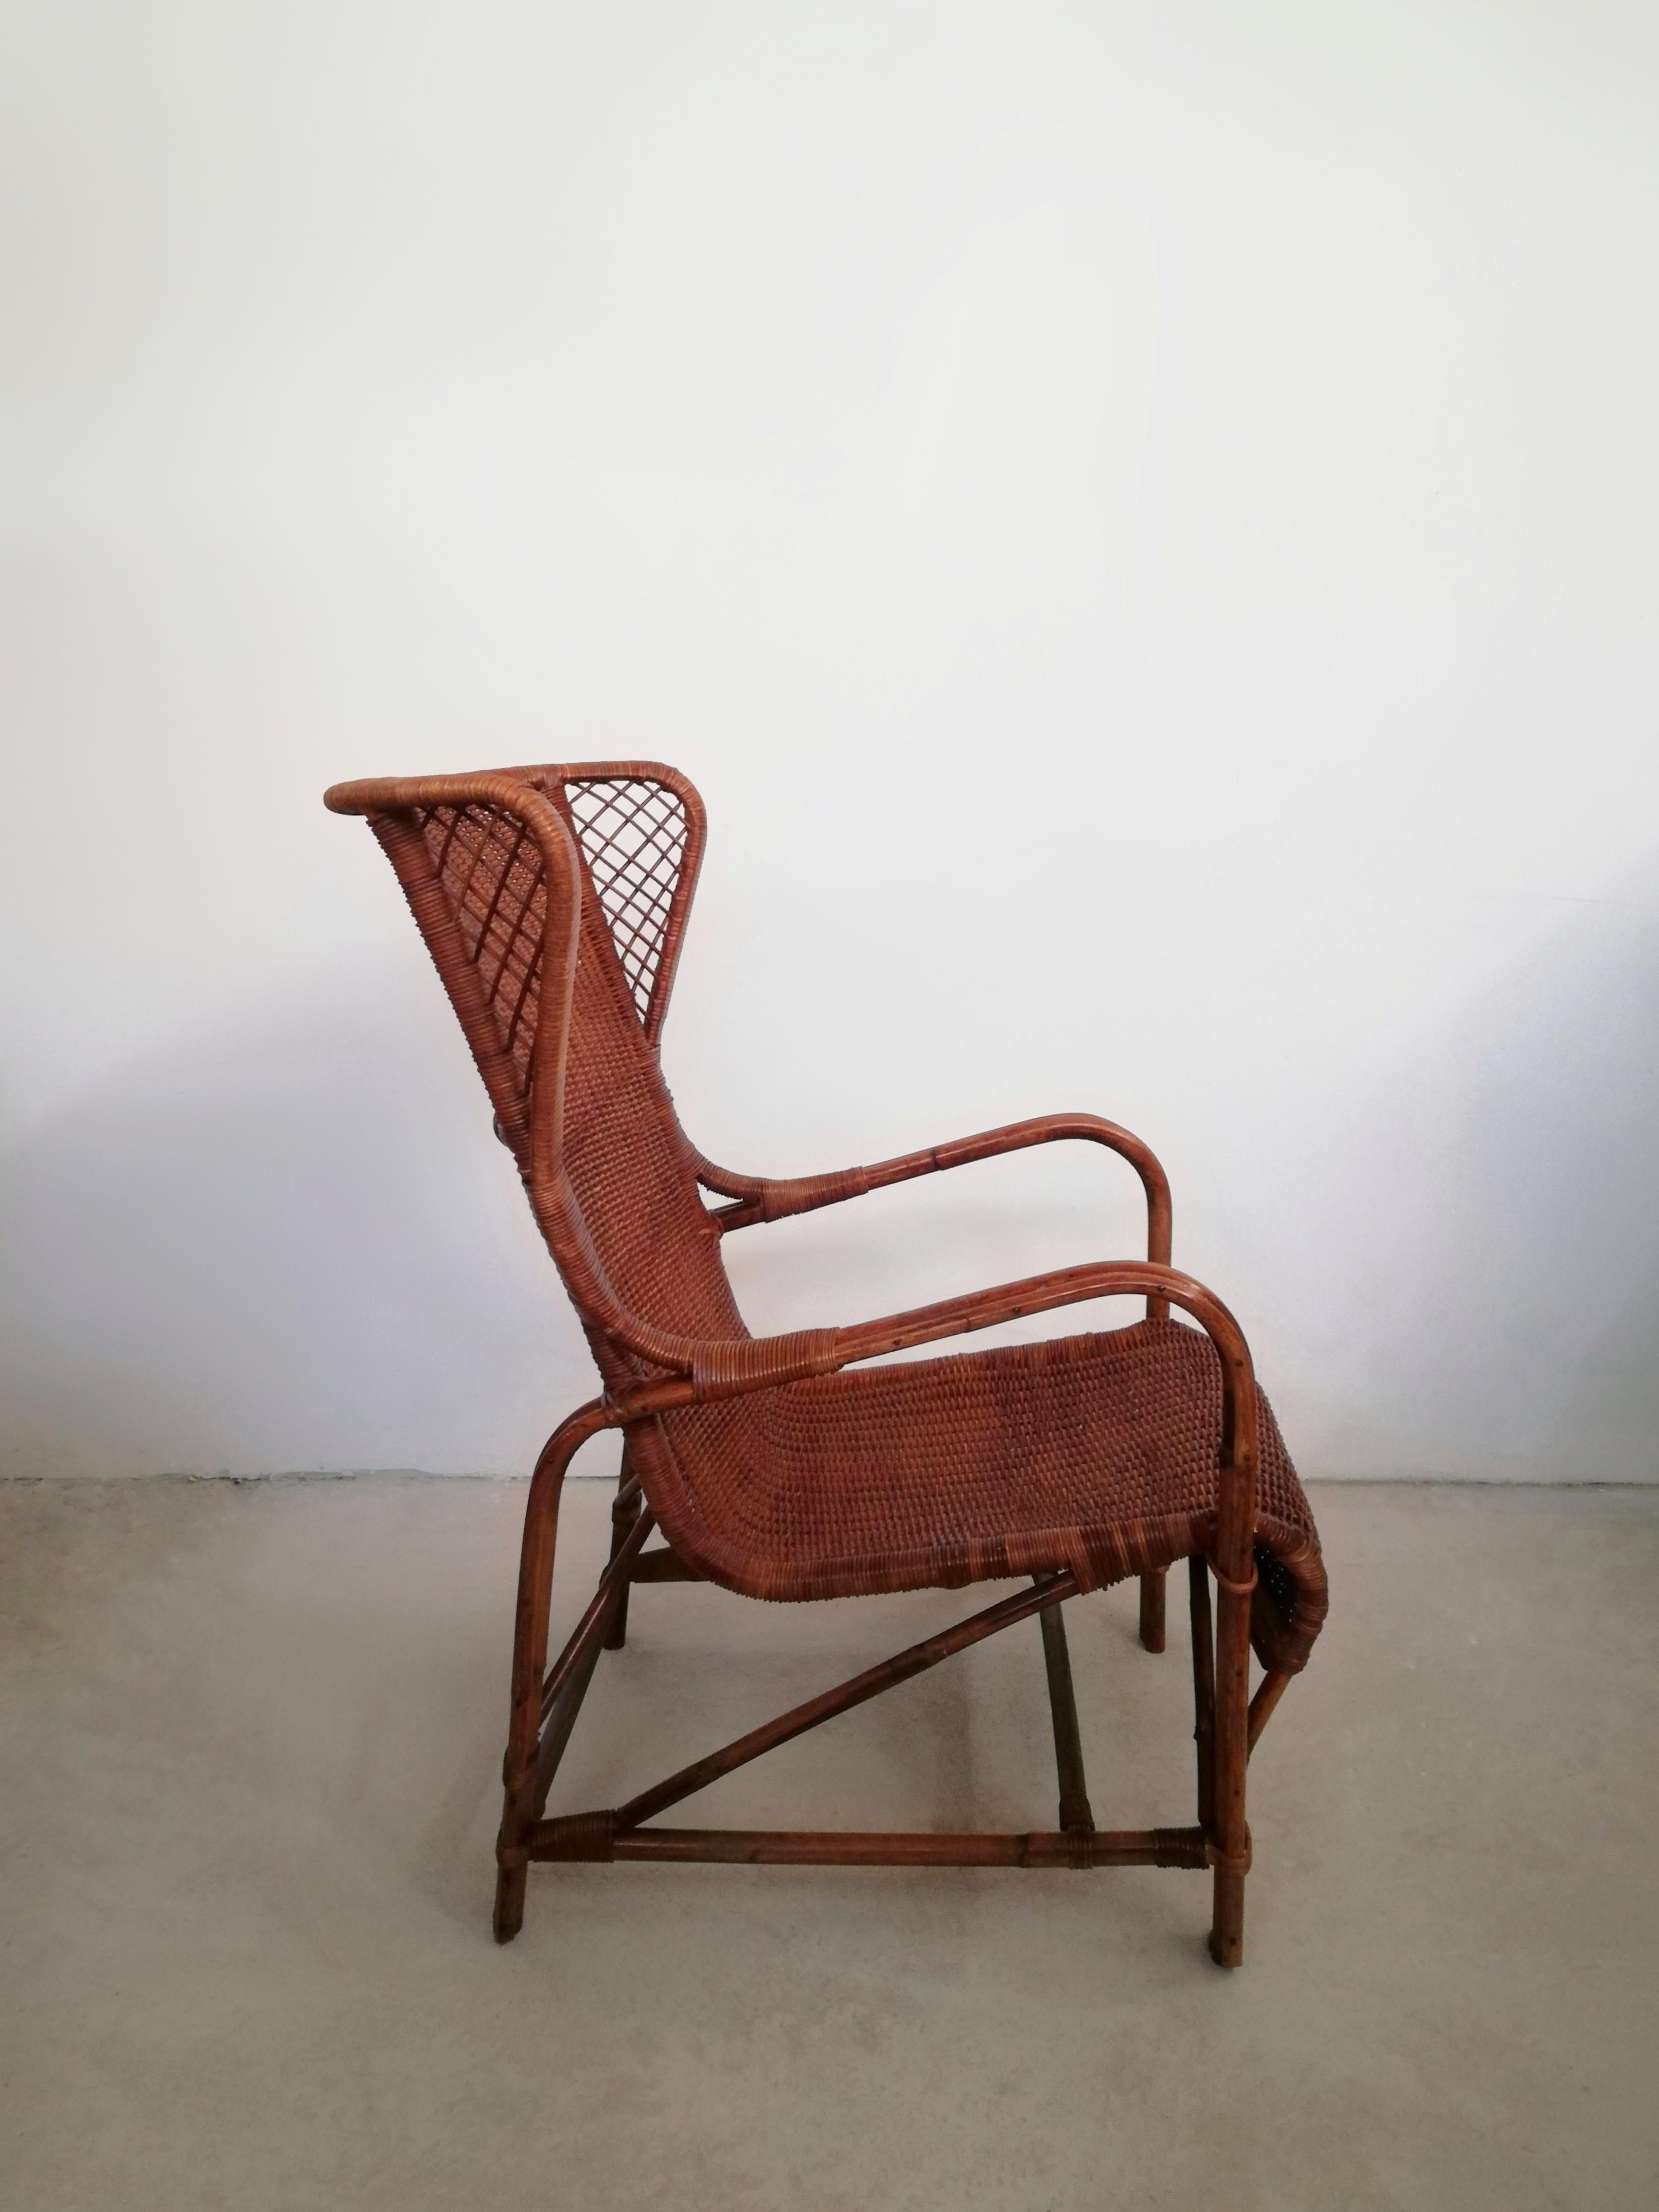 Hand-Crafted Midcentury Wicker Bergère Armchair by Eugenia Alberti Reggio for Ciceri, 1950 For Sale